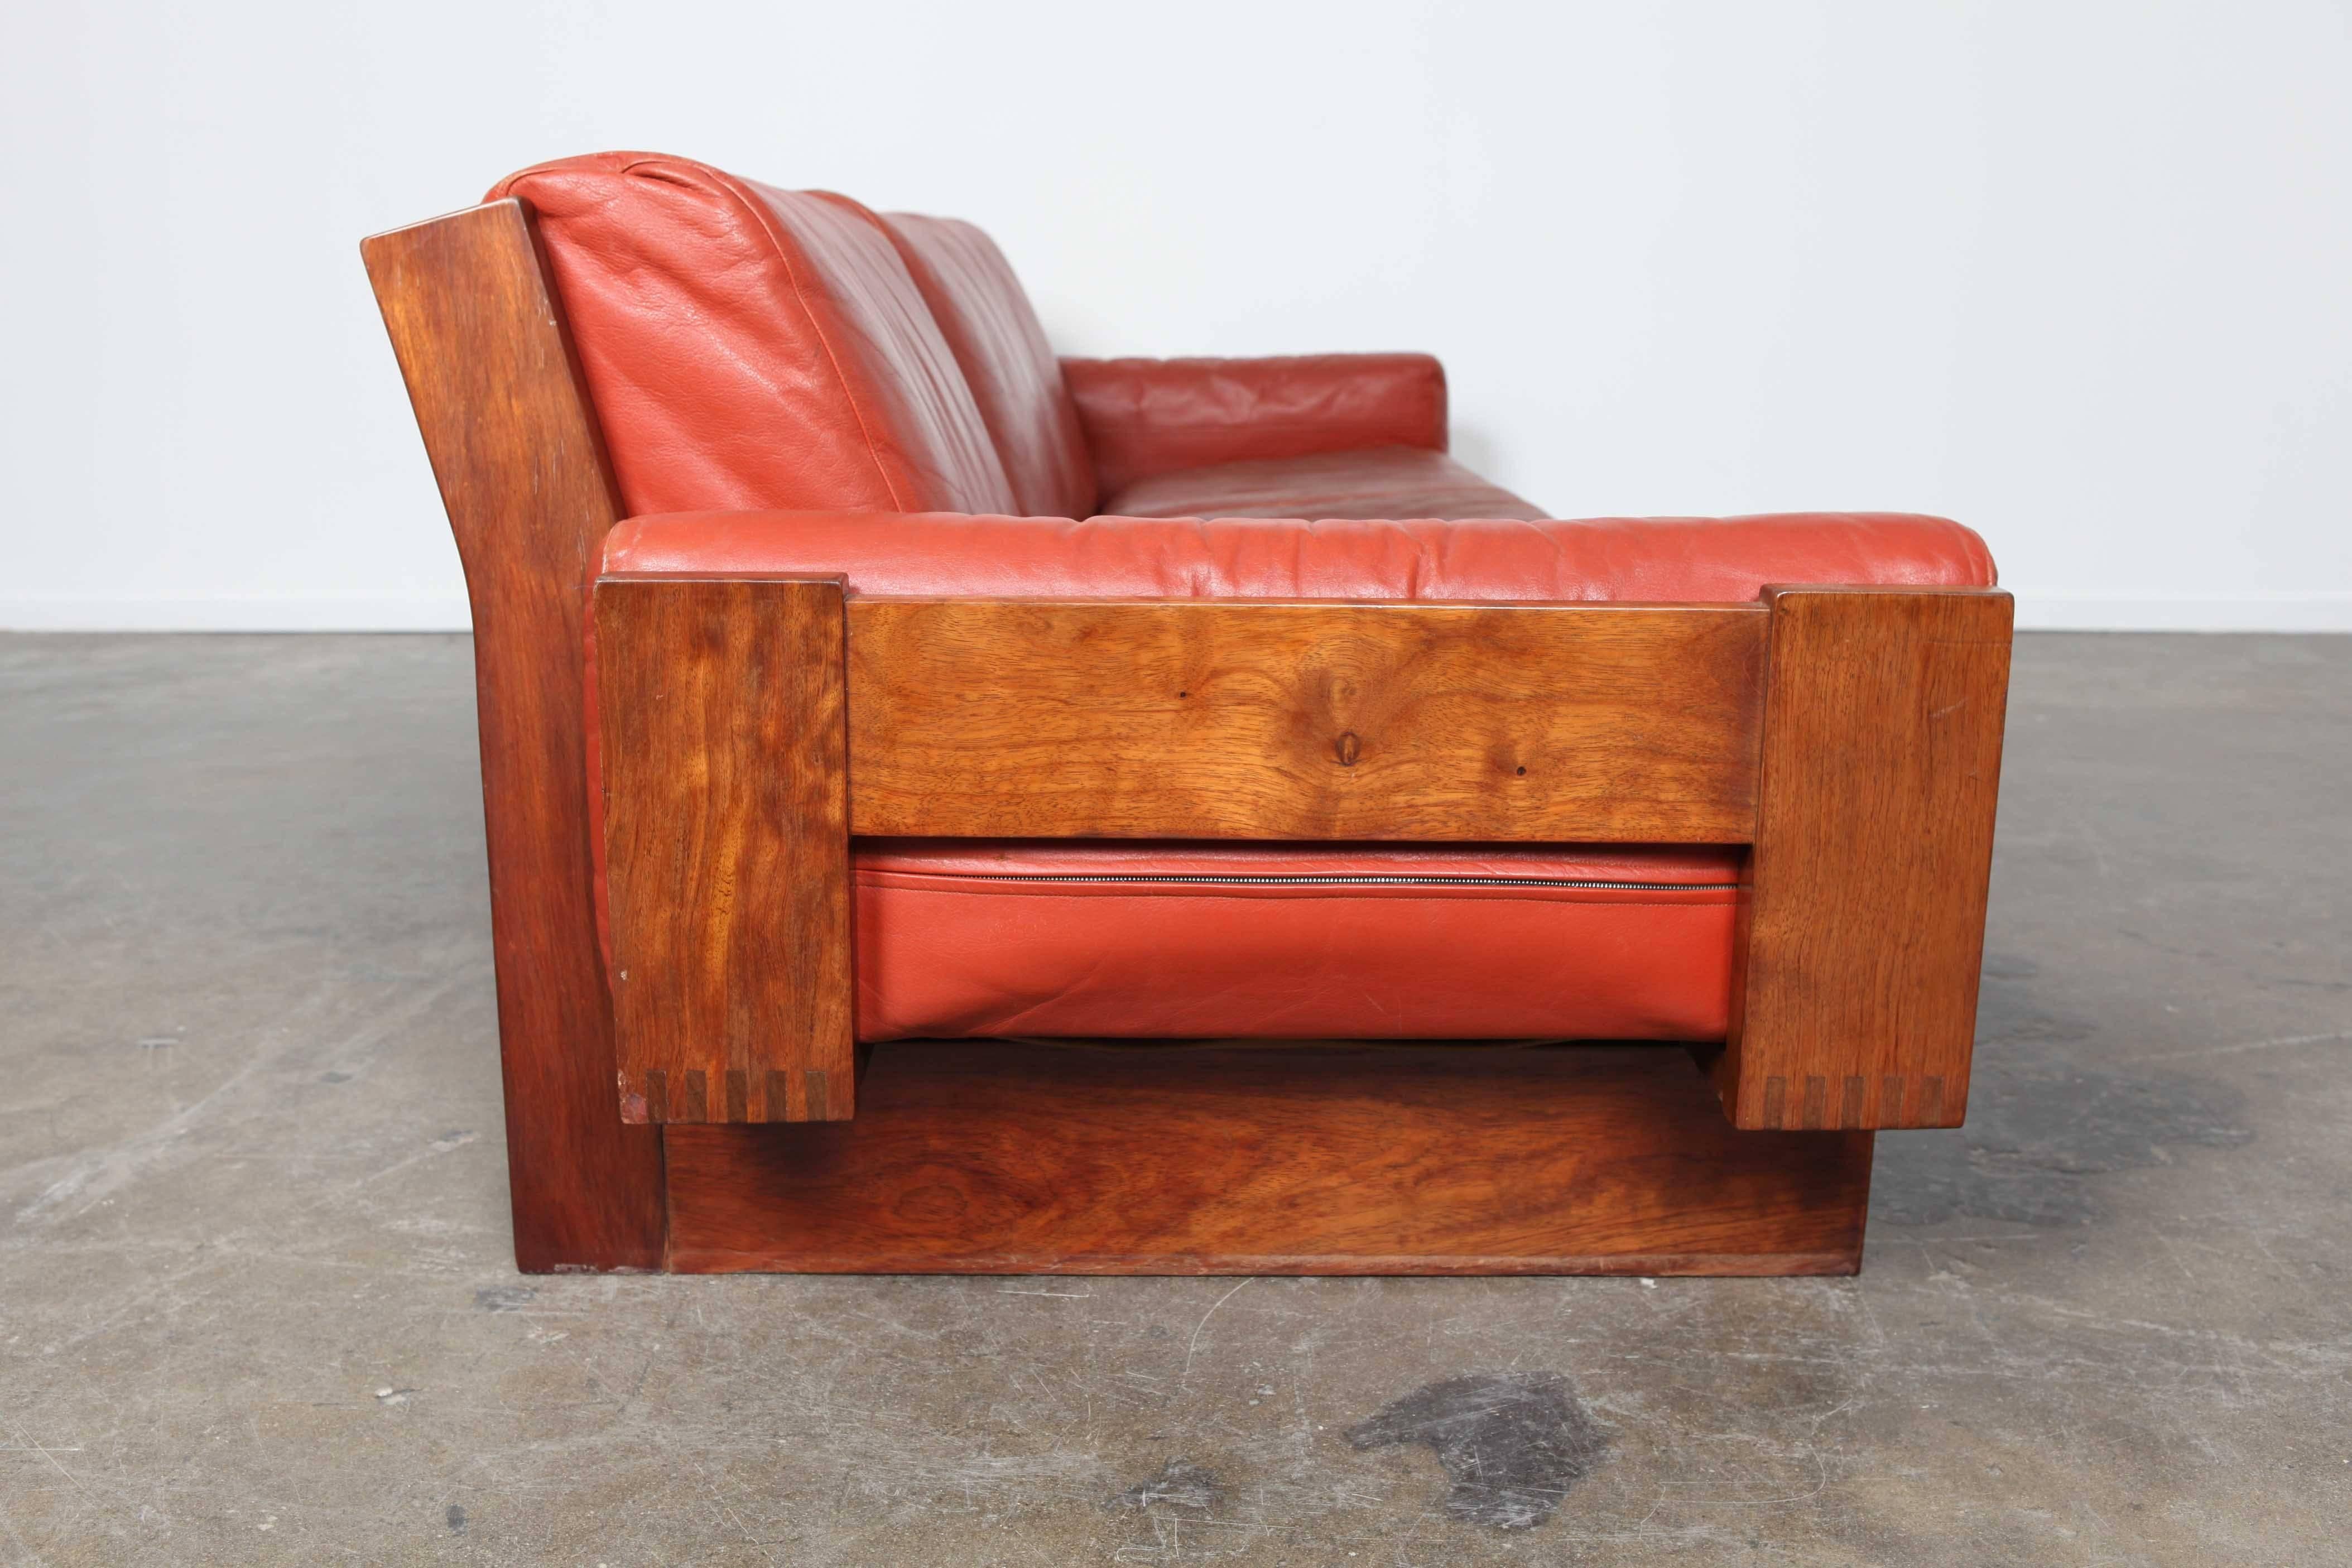 Mid-20th Century Mid-Century Modern Red Leather Three-Seat Sofa by Torbjørn Afdal